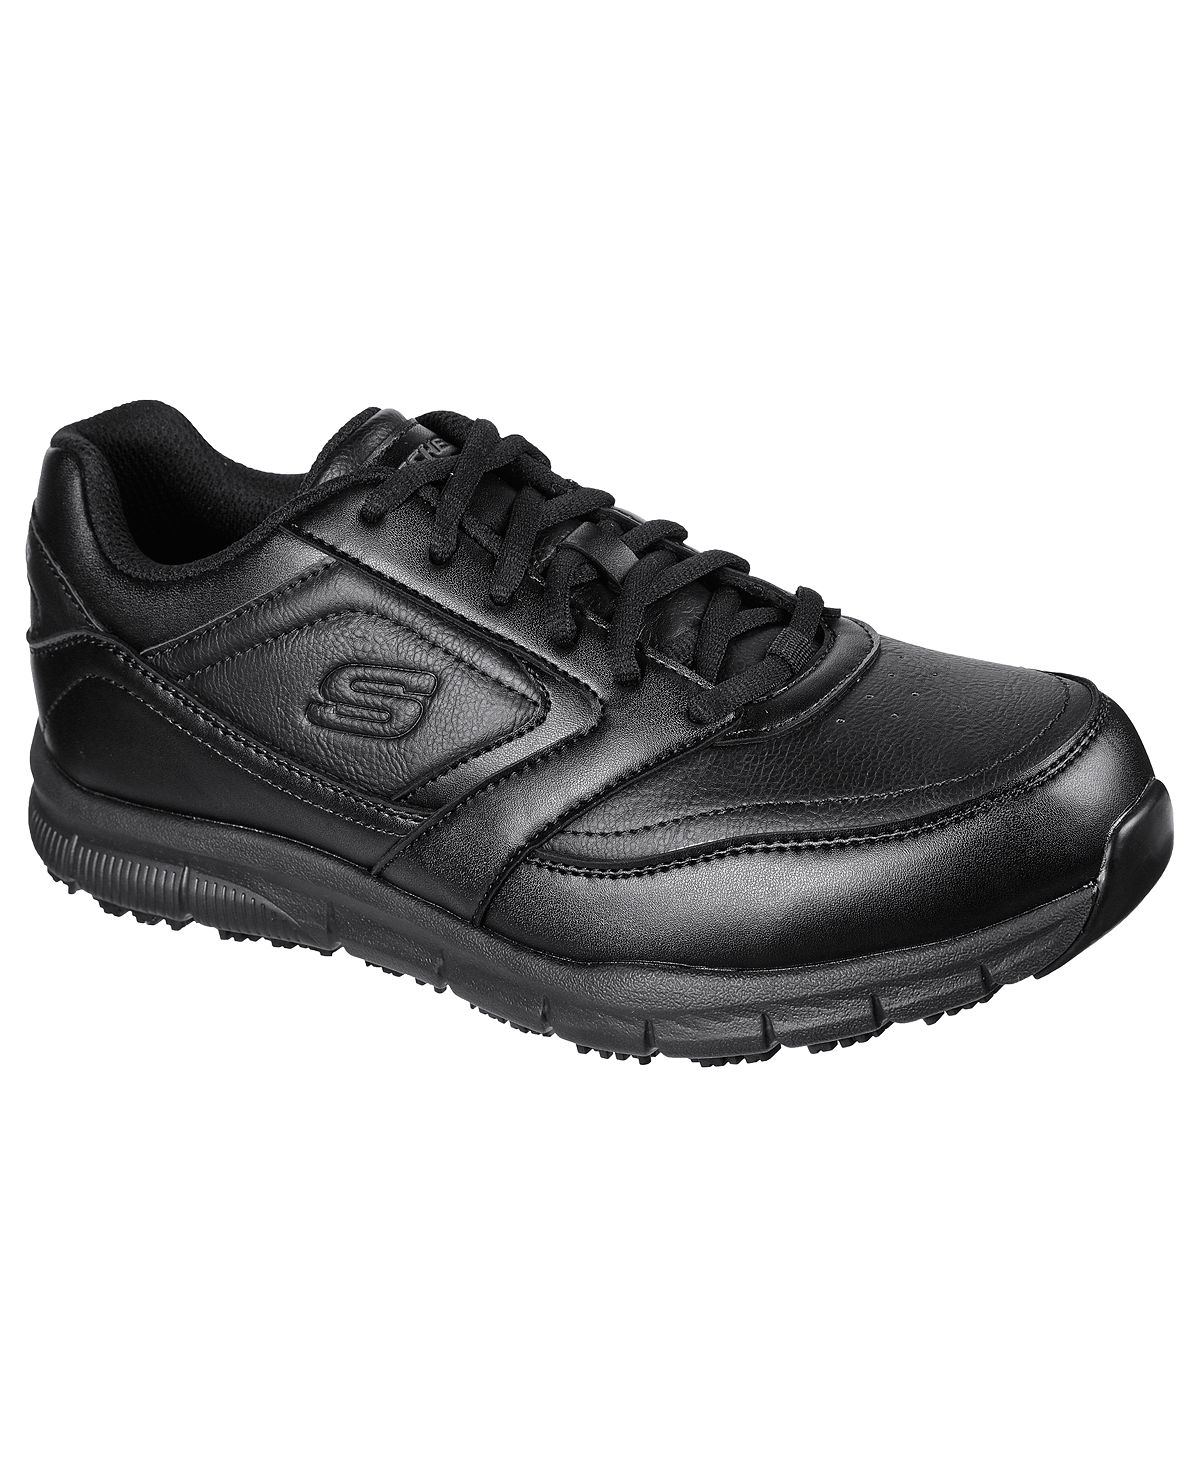 кроссовки skechers sport equalizer 3 0 sumnin relaxed fit black Кроссовки Skechers Men's Work Relaxed Fit Nampa Slip Resistant Work Casual From Finish Line, черный